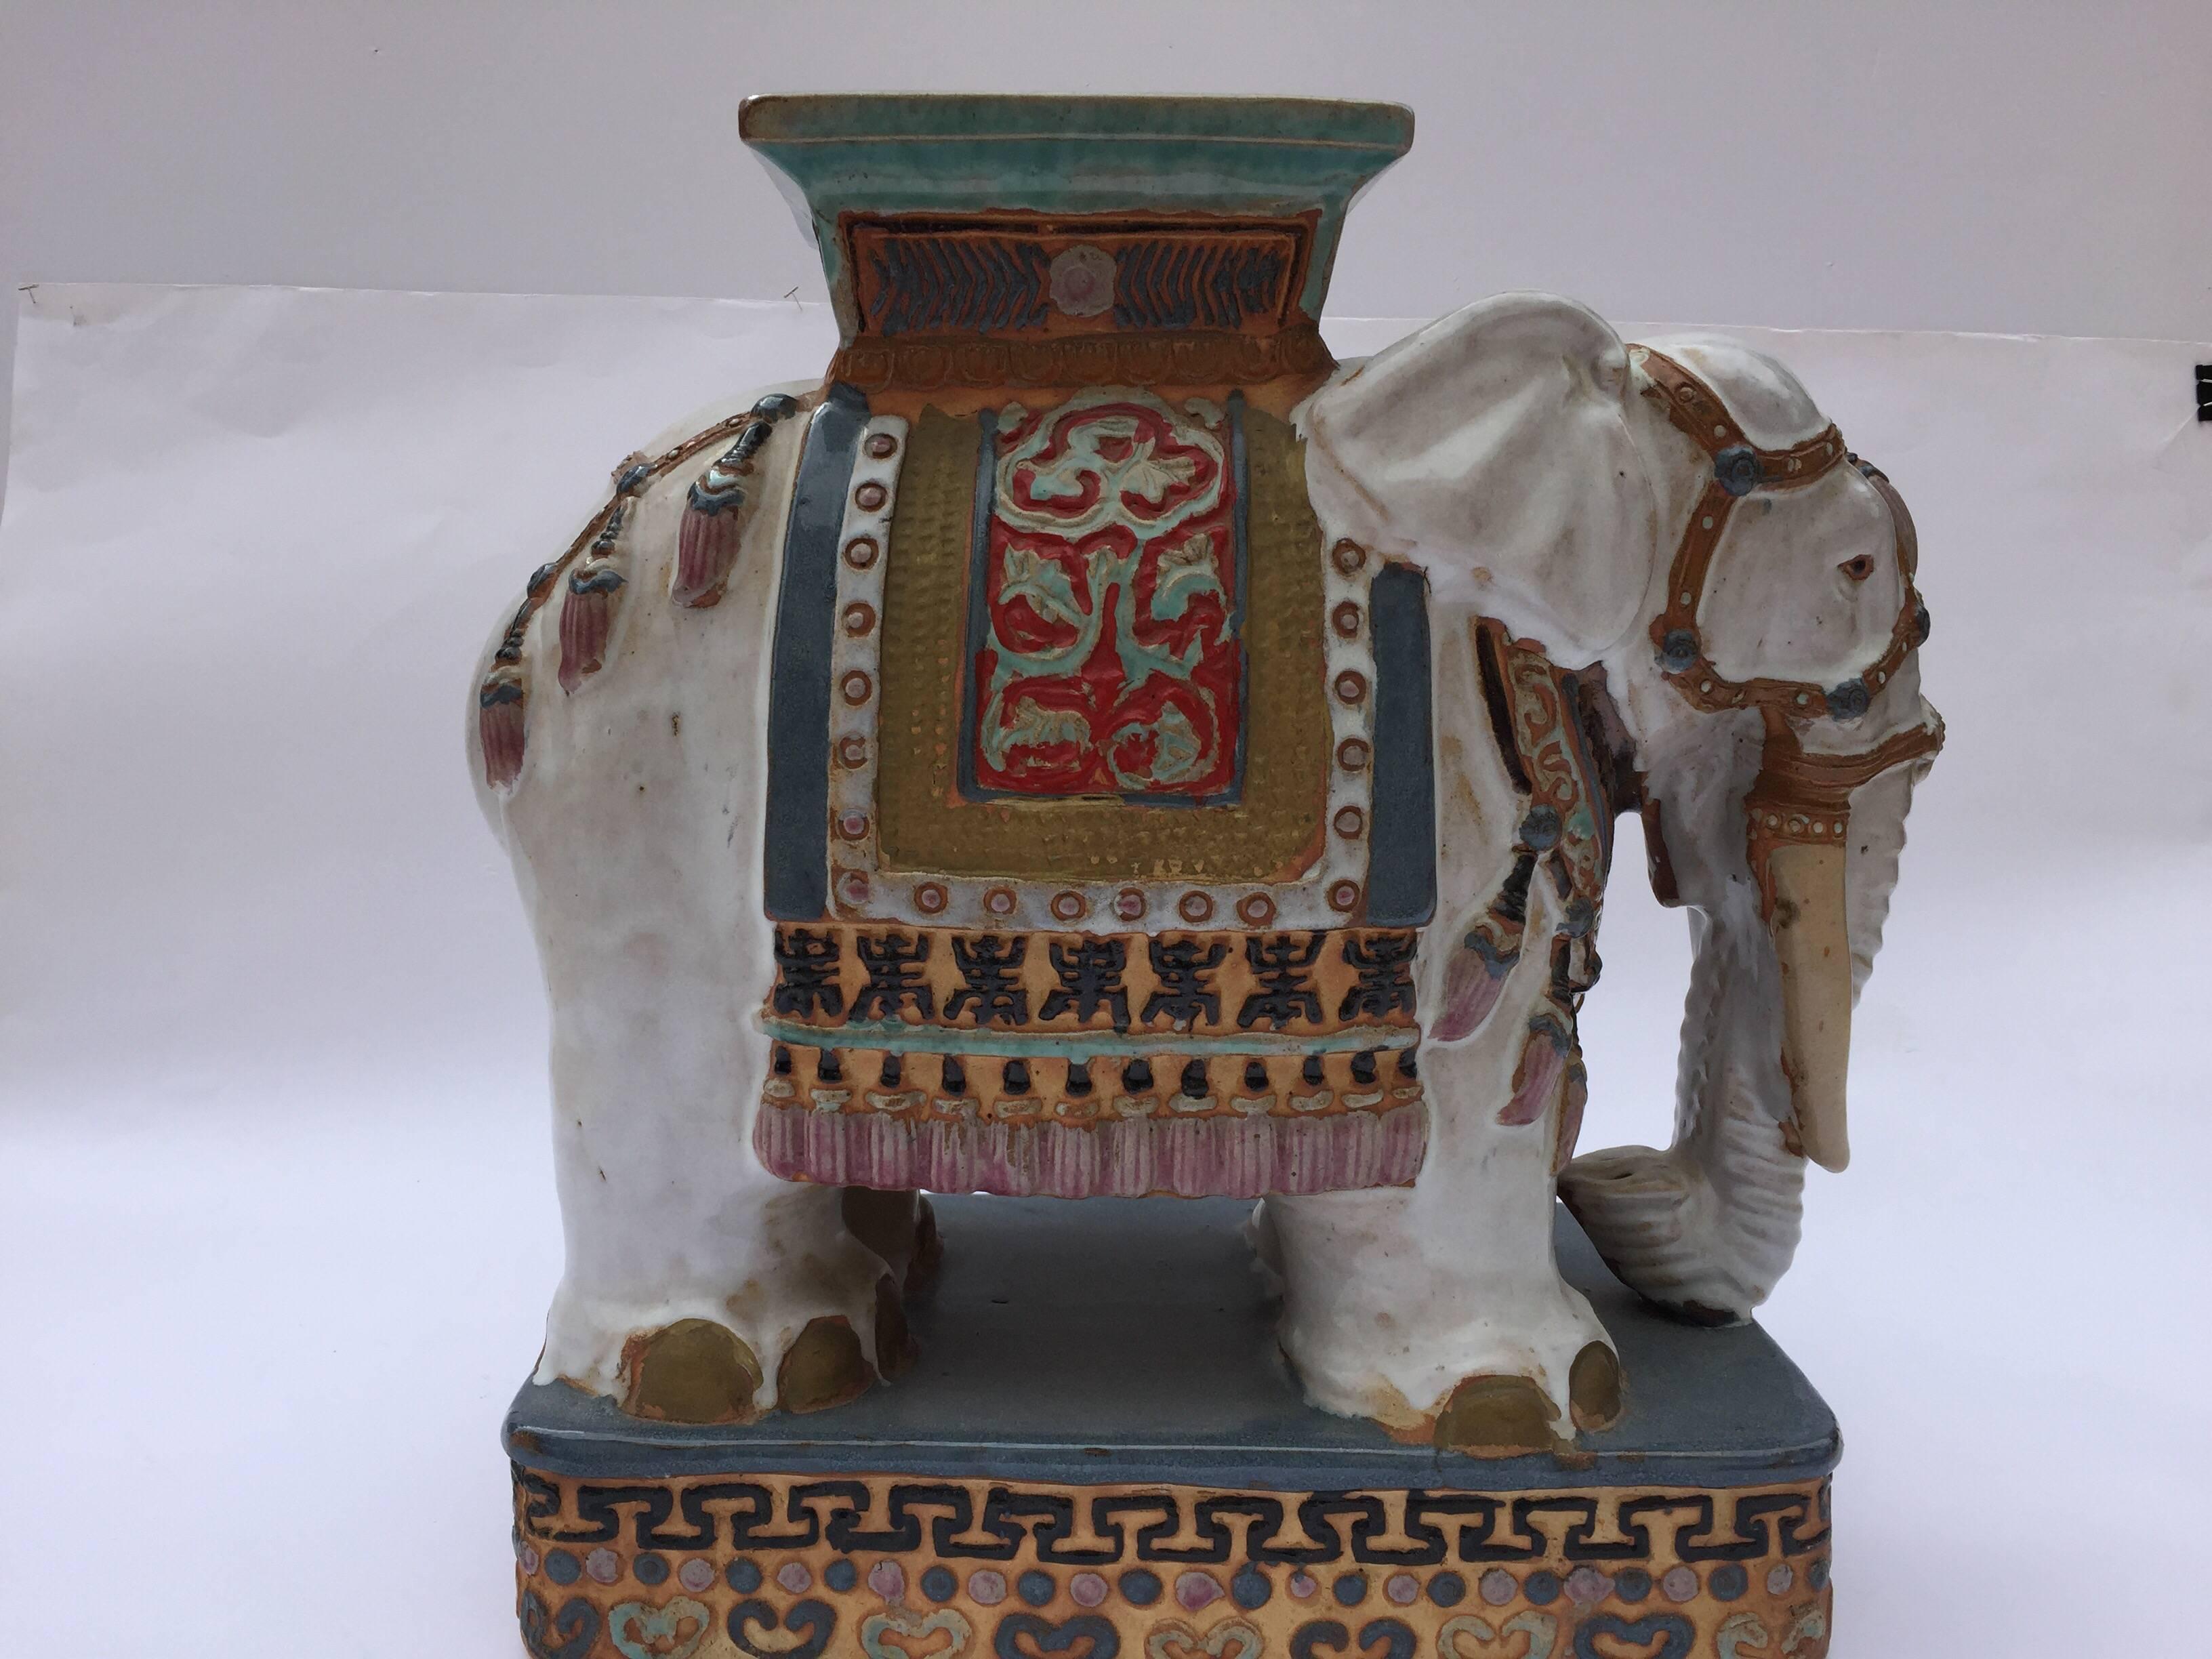 Large pair of vintage midcentury Asian Chinese white elephant outdoor garden stools or side drink tables.
Hand-painted ceramic elephant garden stools richly decorated with earth-tone glazes and symbols of longevity in aqua, ivory, red and gold